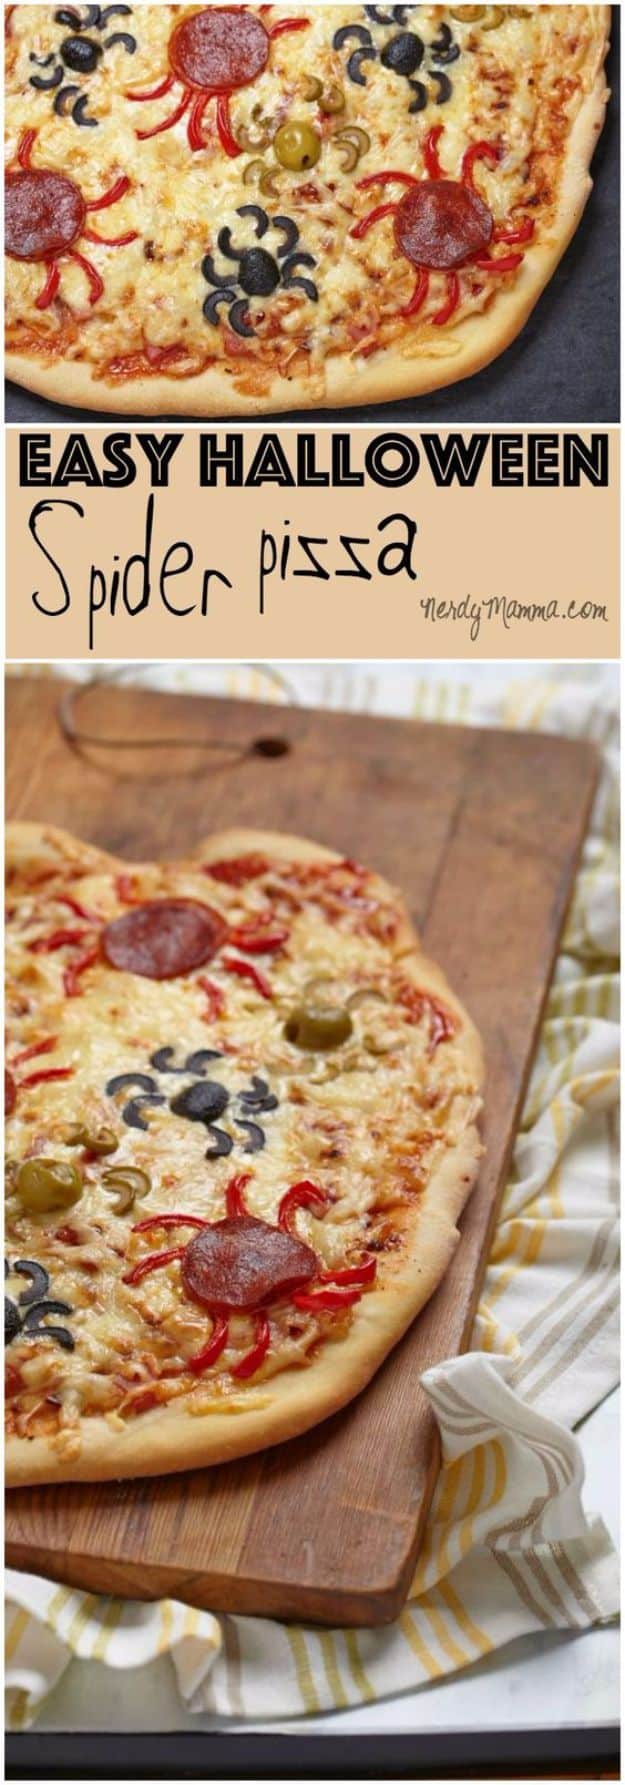 Best Halloween Party Food Recipes - Easy Halloween Spider Pizza - Healthy Ideas for Kids for School, Teens and Adults - Easy and Quick Recipes and Idea for Dips, Chips, Spooky Cookies and Treats - Appetizers and Finger Foods Made With Vegetables, No Candy, Cheap Food, Scary DIY Party Foods With Step by Step Tutorials #halloween #halloweenrecipes #halloweenparty